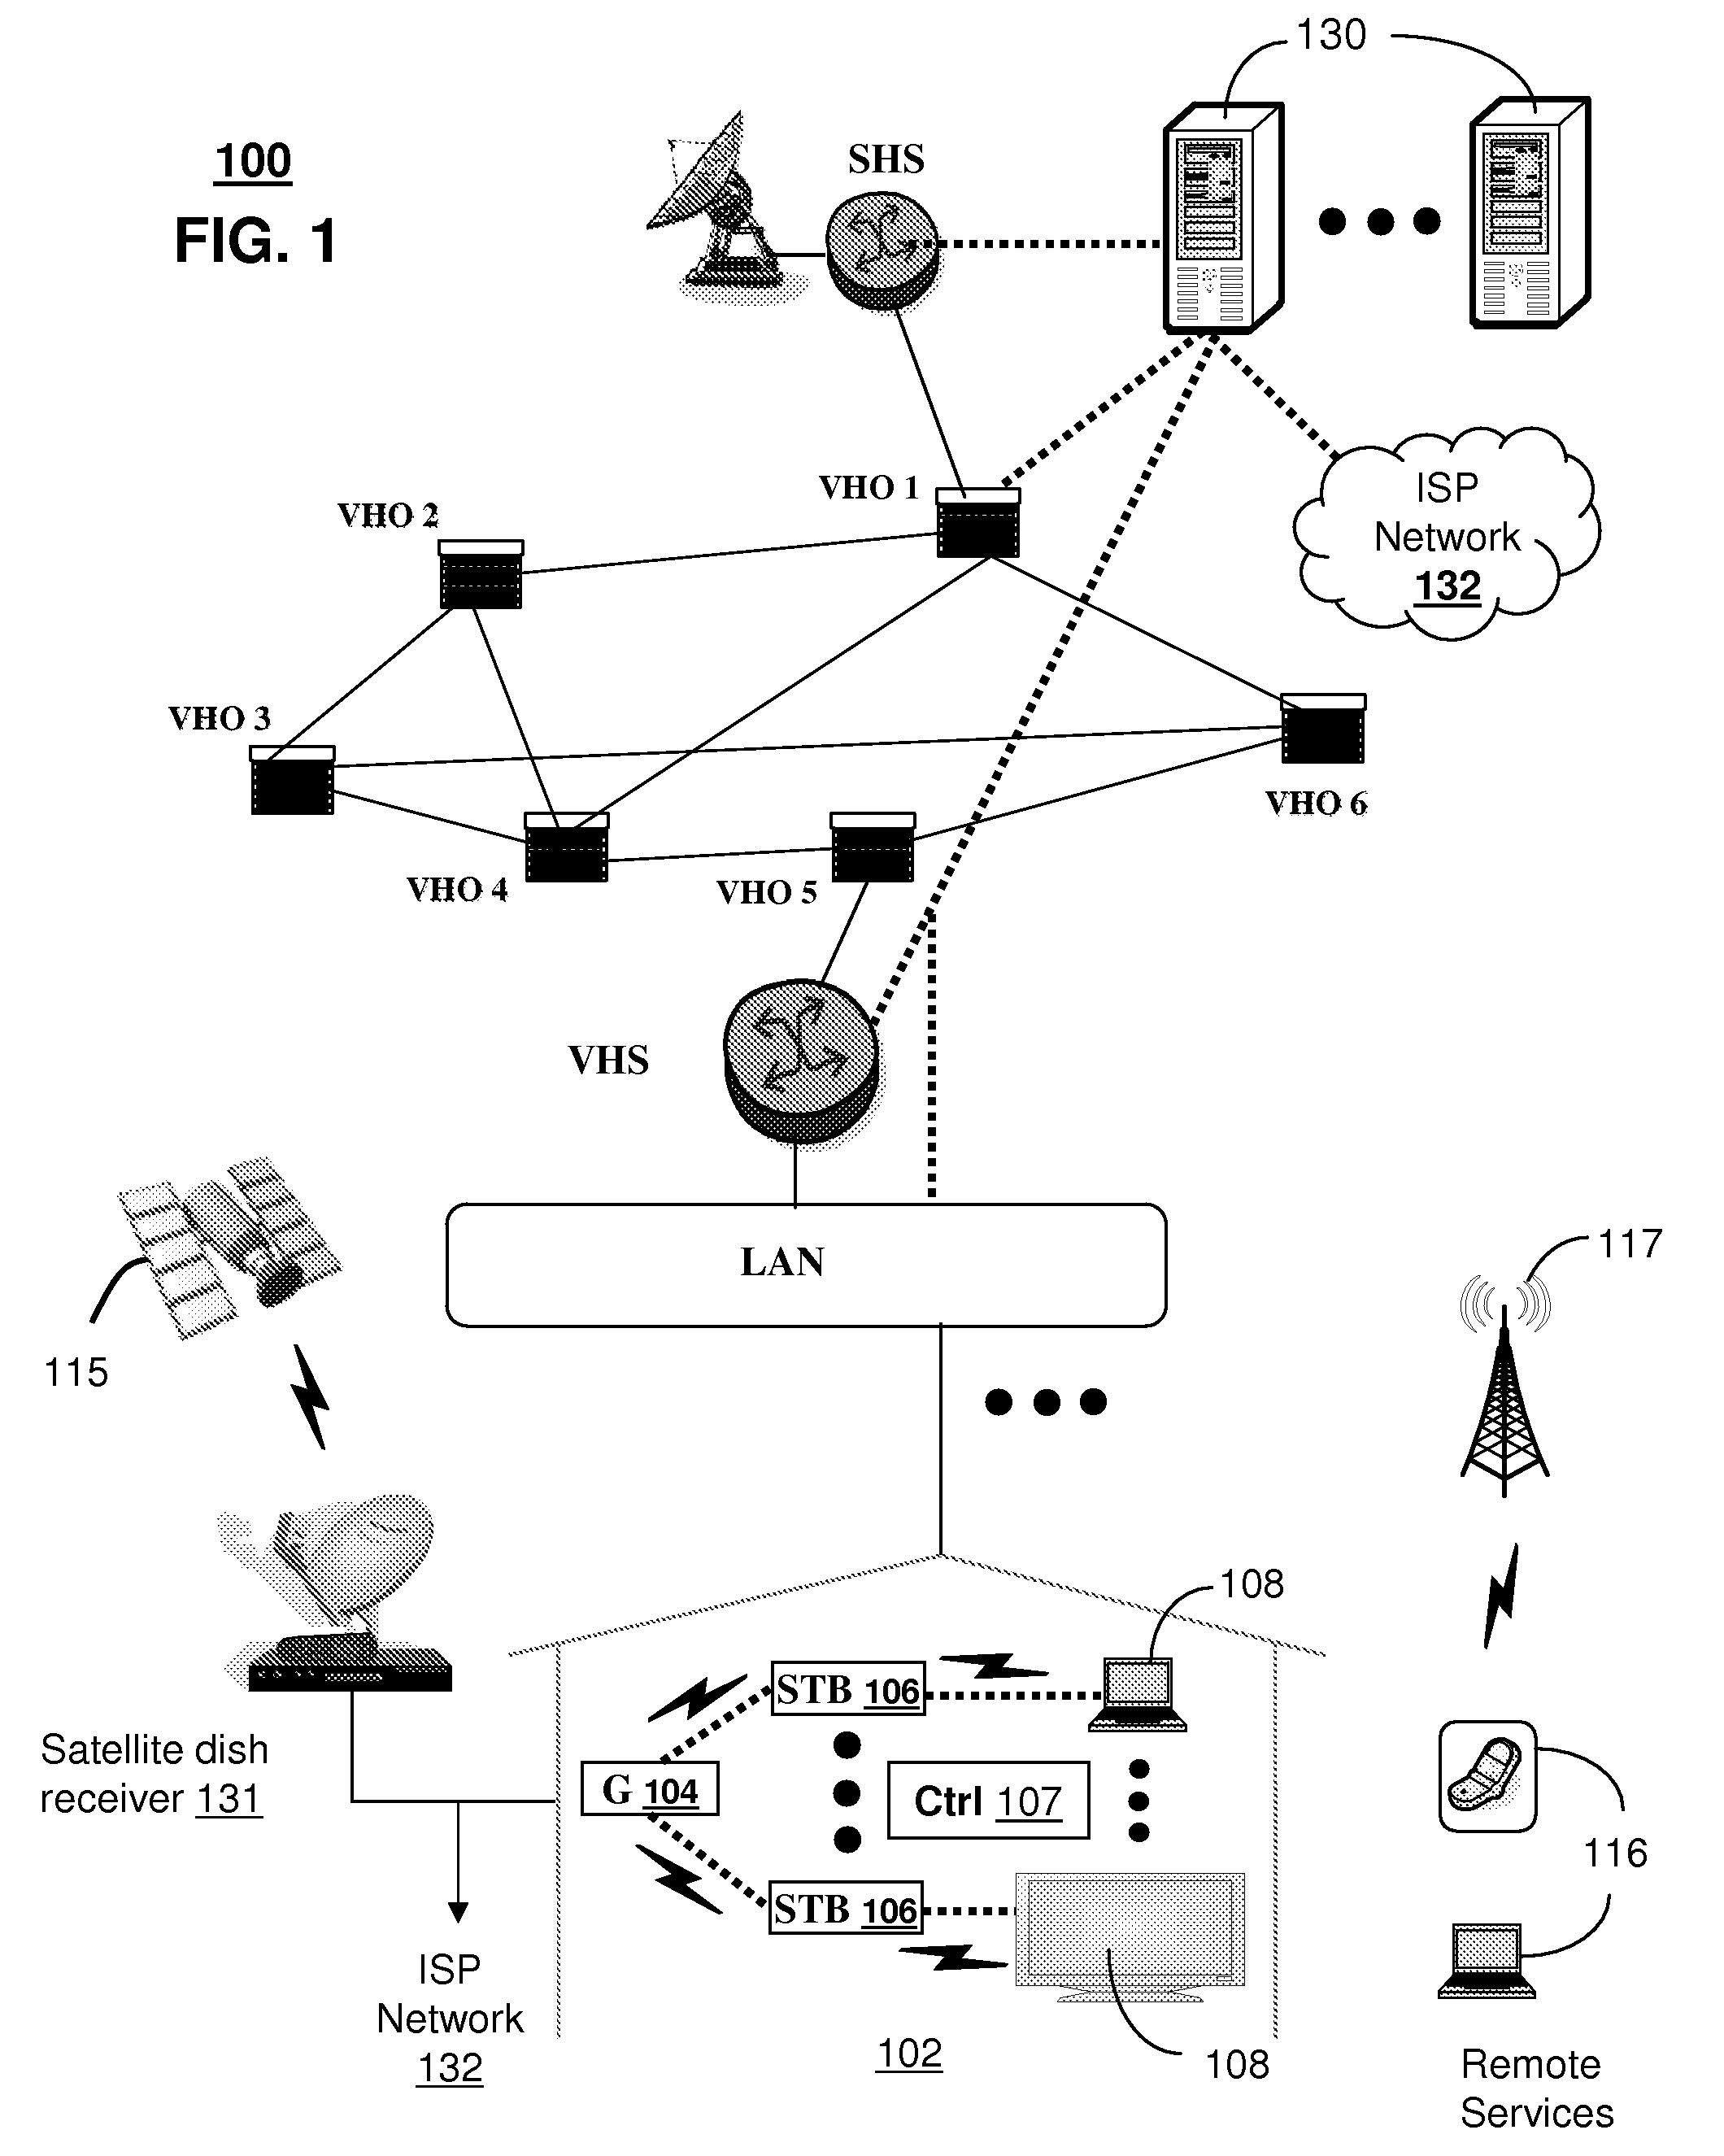 System for managing recording conflicts of media programs